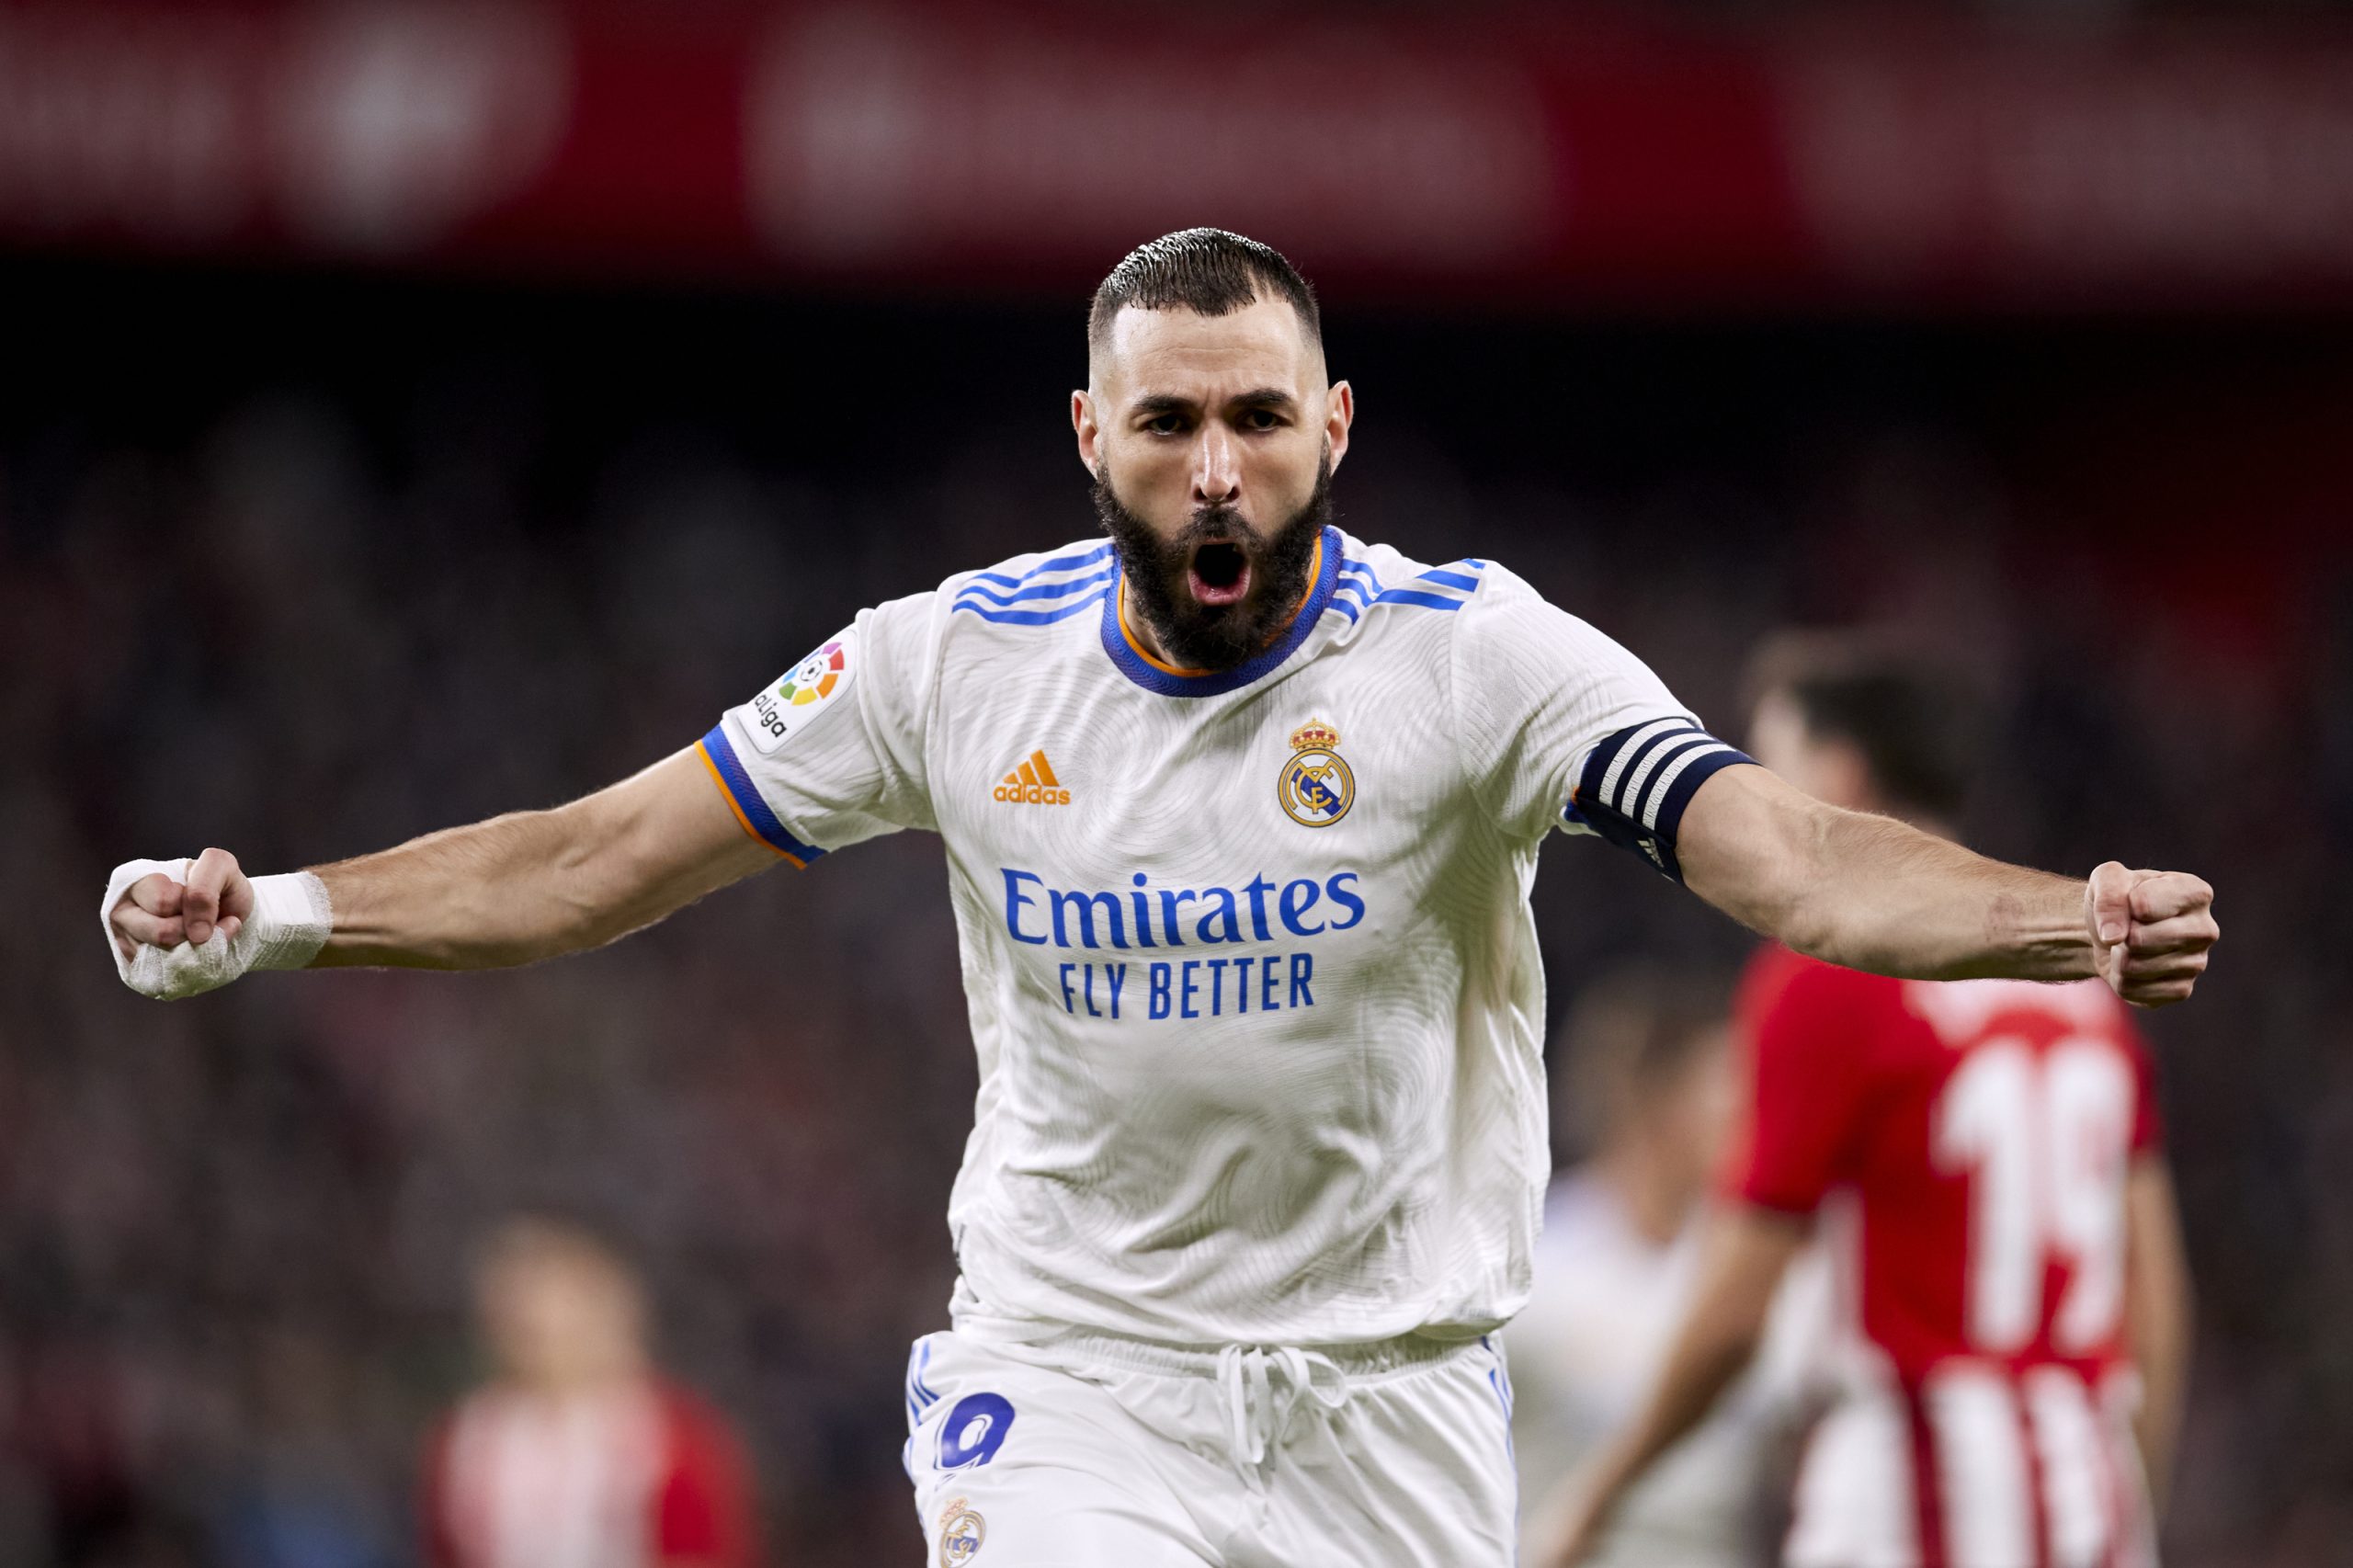 KARIM BENZEMA NETS LATE WINNER AS REAL BEAT RAYO IN LOCAL MADRID DERBY